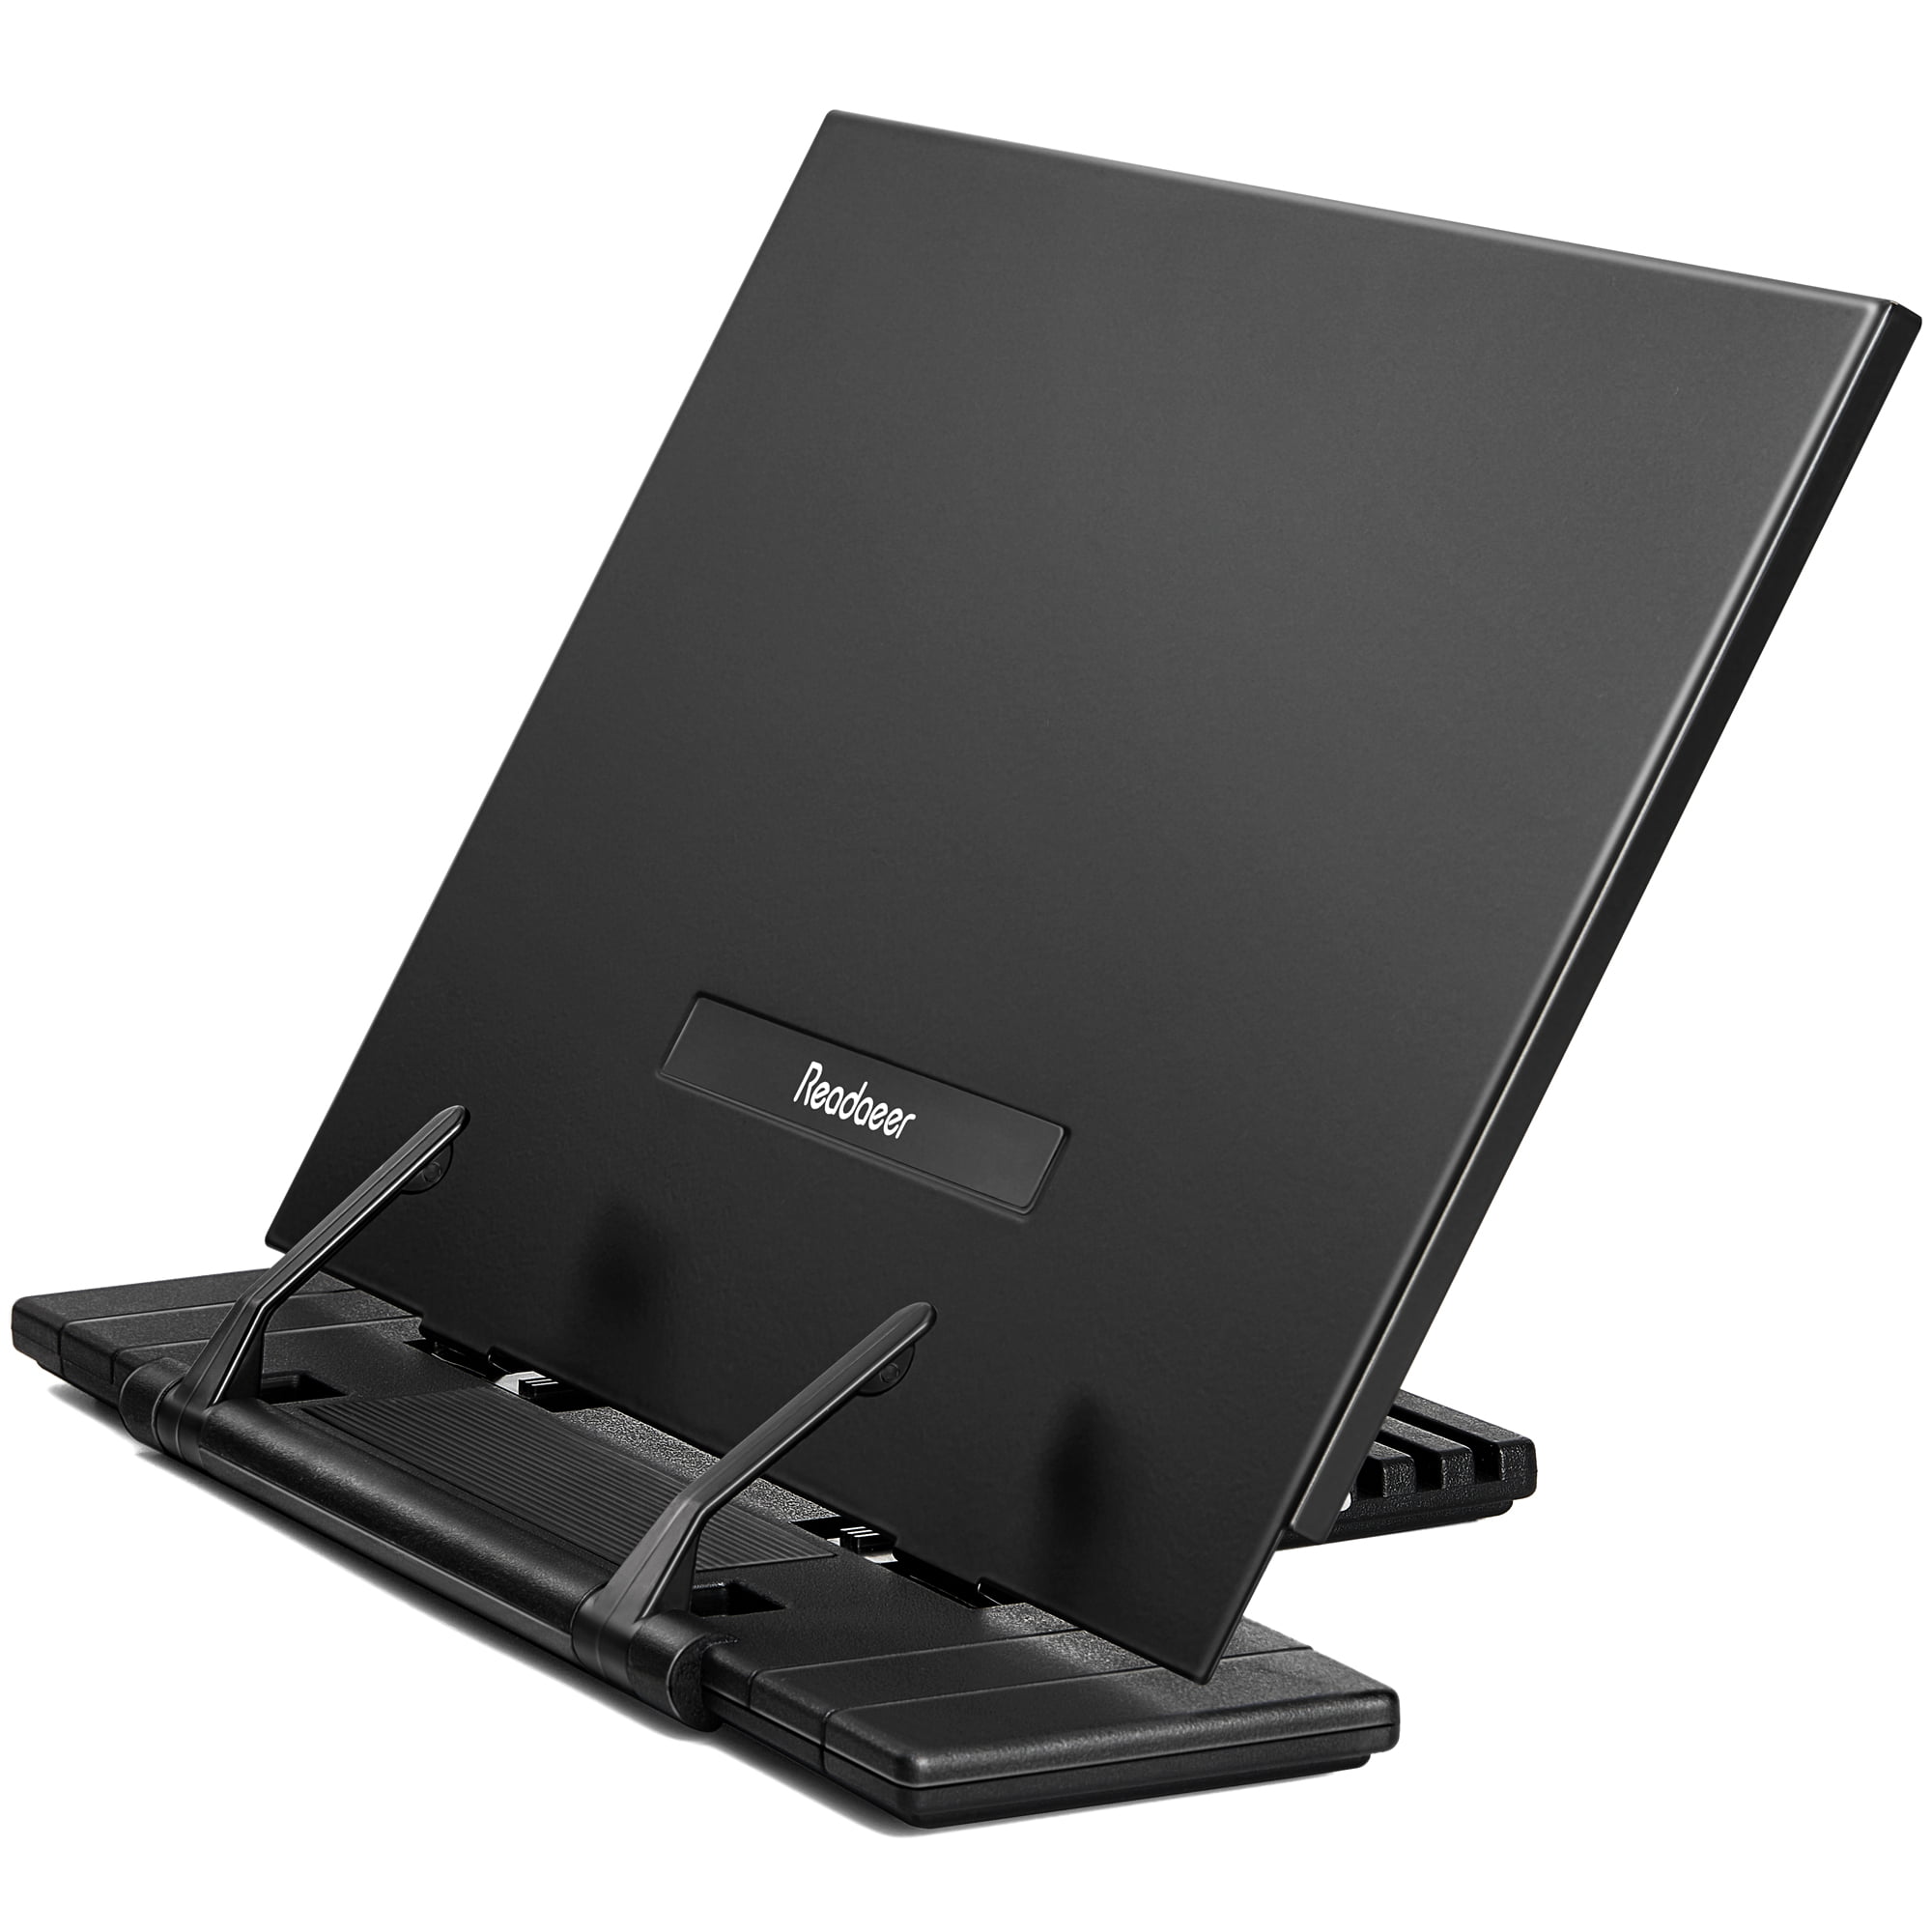 Yaheetech Mobile Lectern Podium Rolling Standing up Desk for Reading LapTop Stand w/Tilted Top Board & Edge Stopper Renewed 